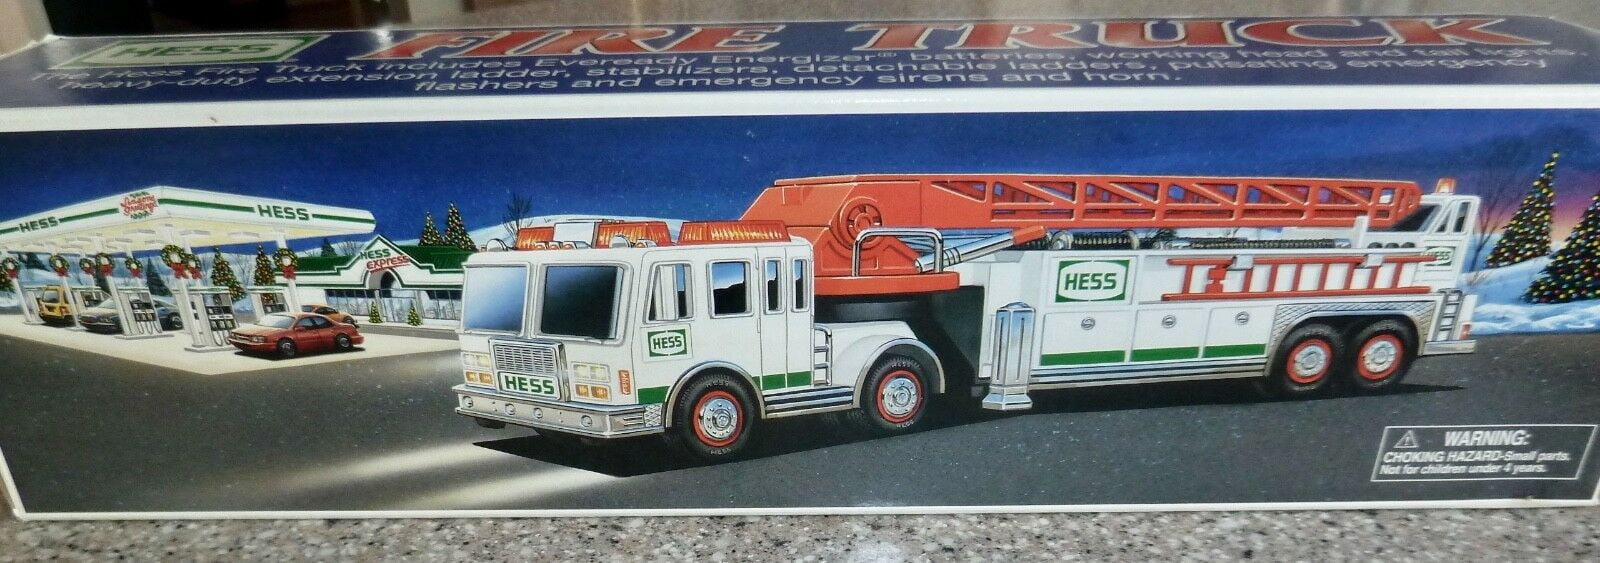 2000 Hess Toy FIRE TRUCK New in Box Collectible LIGHTS SOUND 